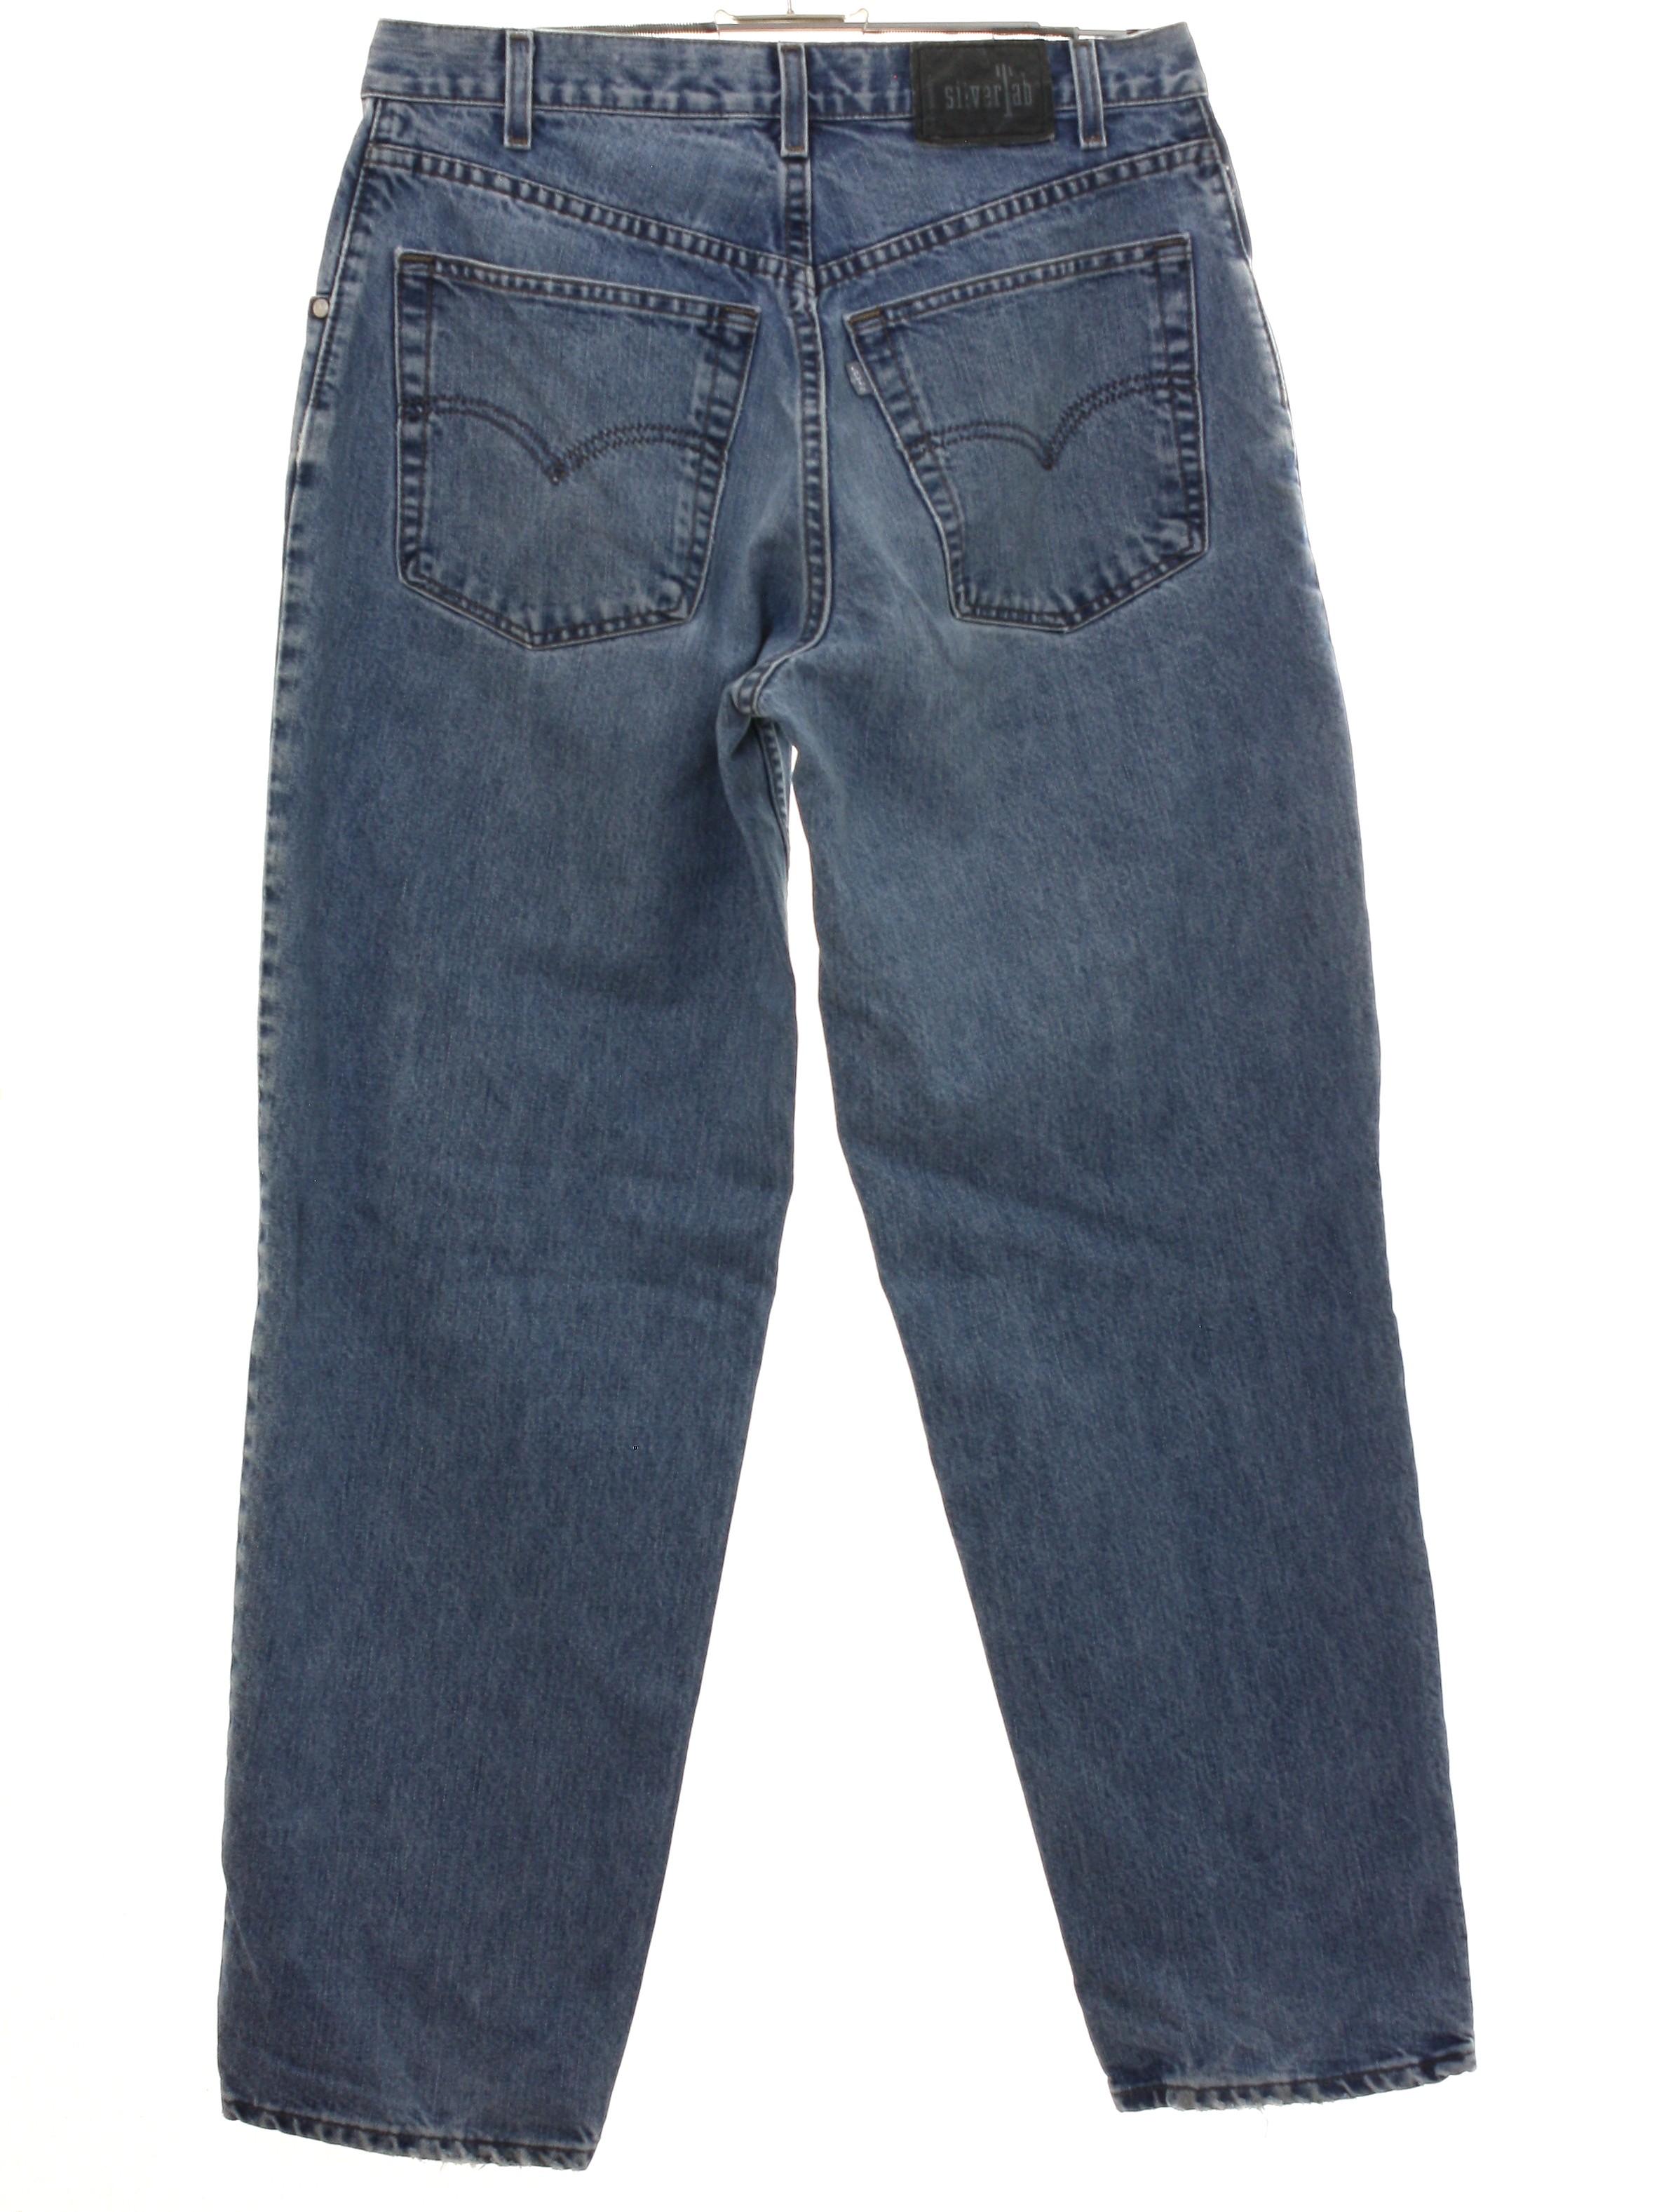 Retro 1990's Pants (Levis) : Late 90s -Levis- silverTab- Mens faded ...